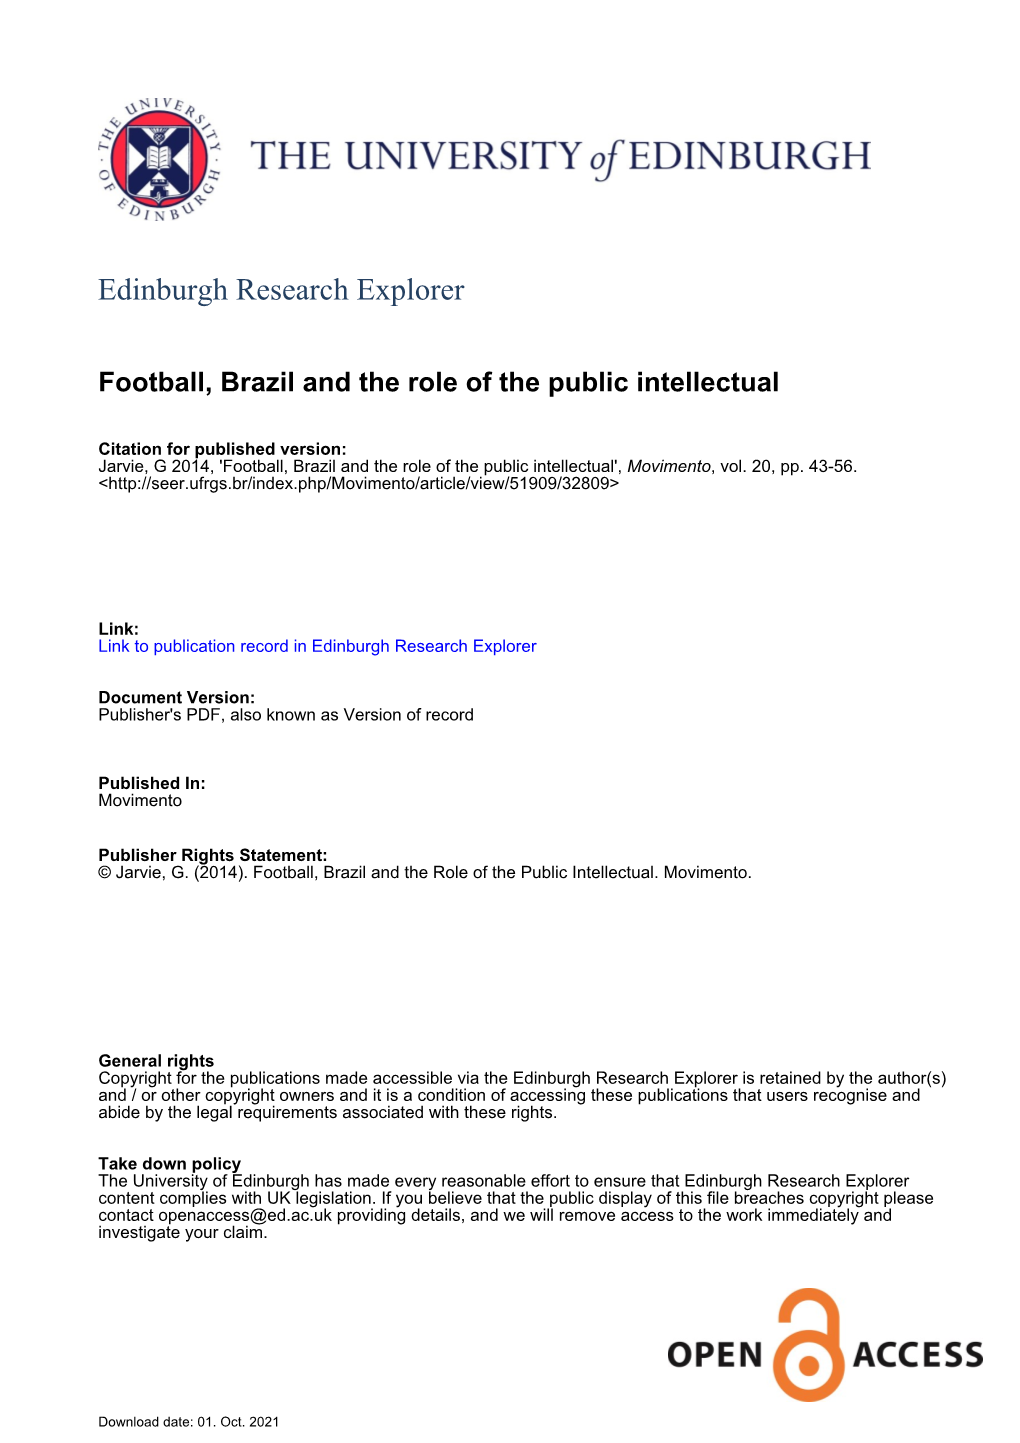 Football, Brazil and the Role of the Public Intellectual